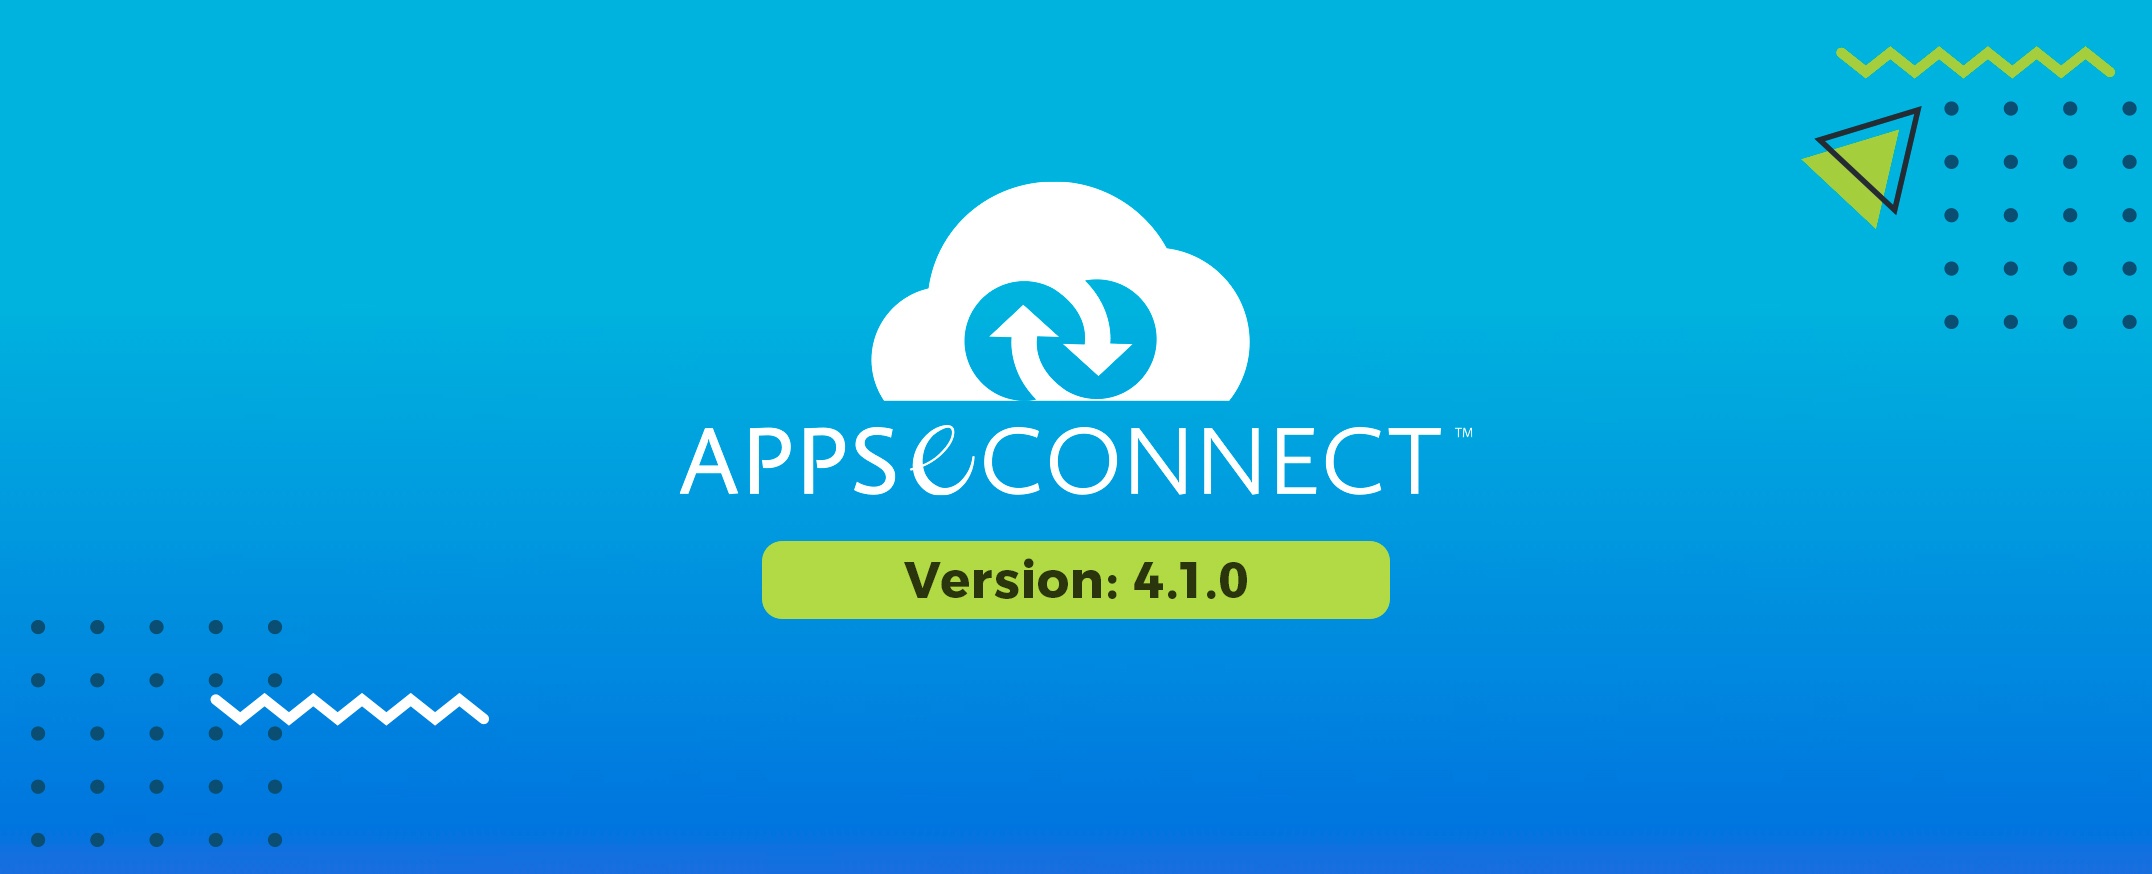 APPSeCONNECT-4.1.0-Product-release